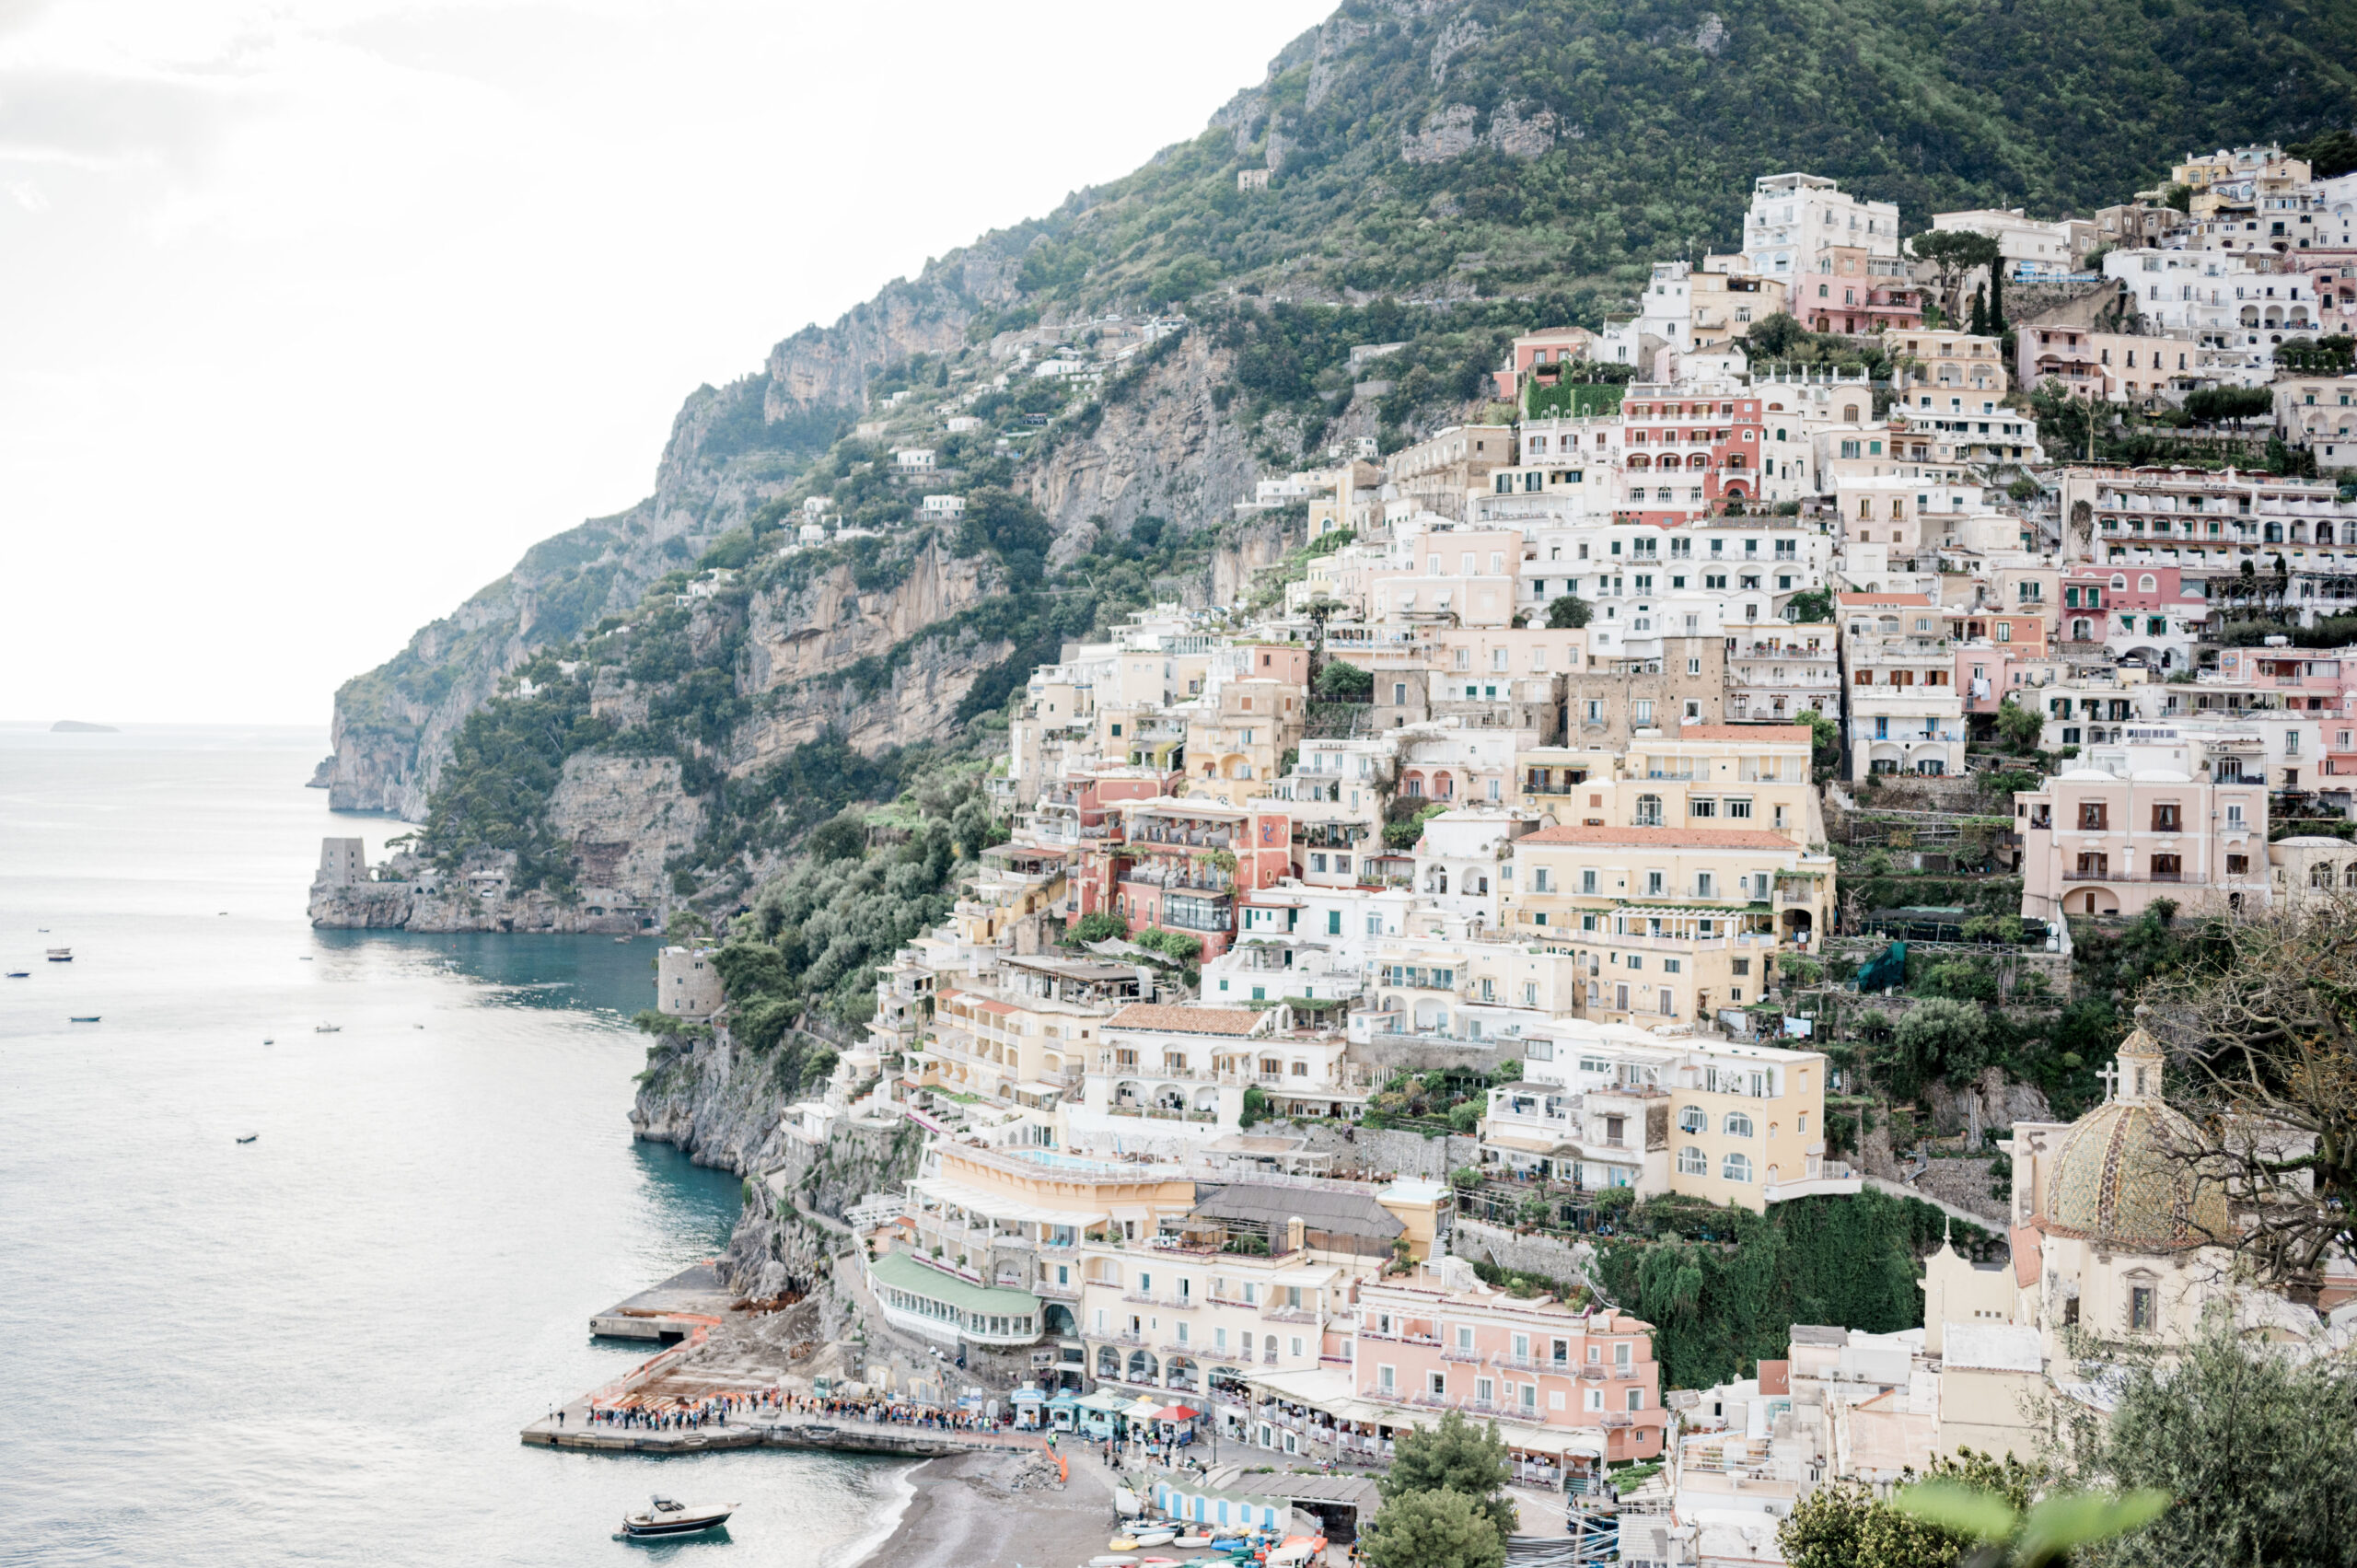 A view of Positano from afar---discover the 5 best places to eat in Positano